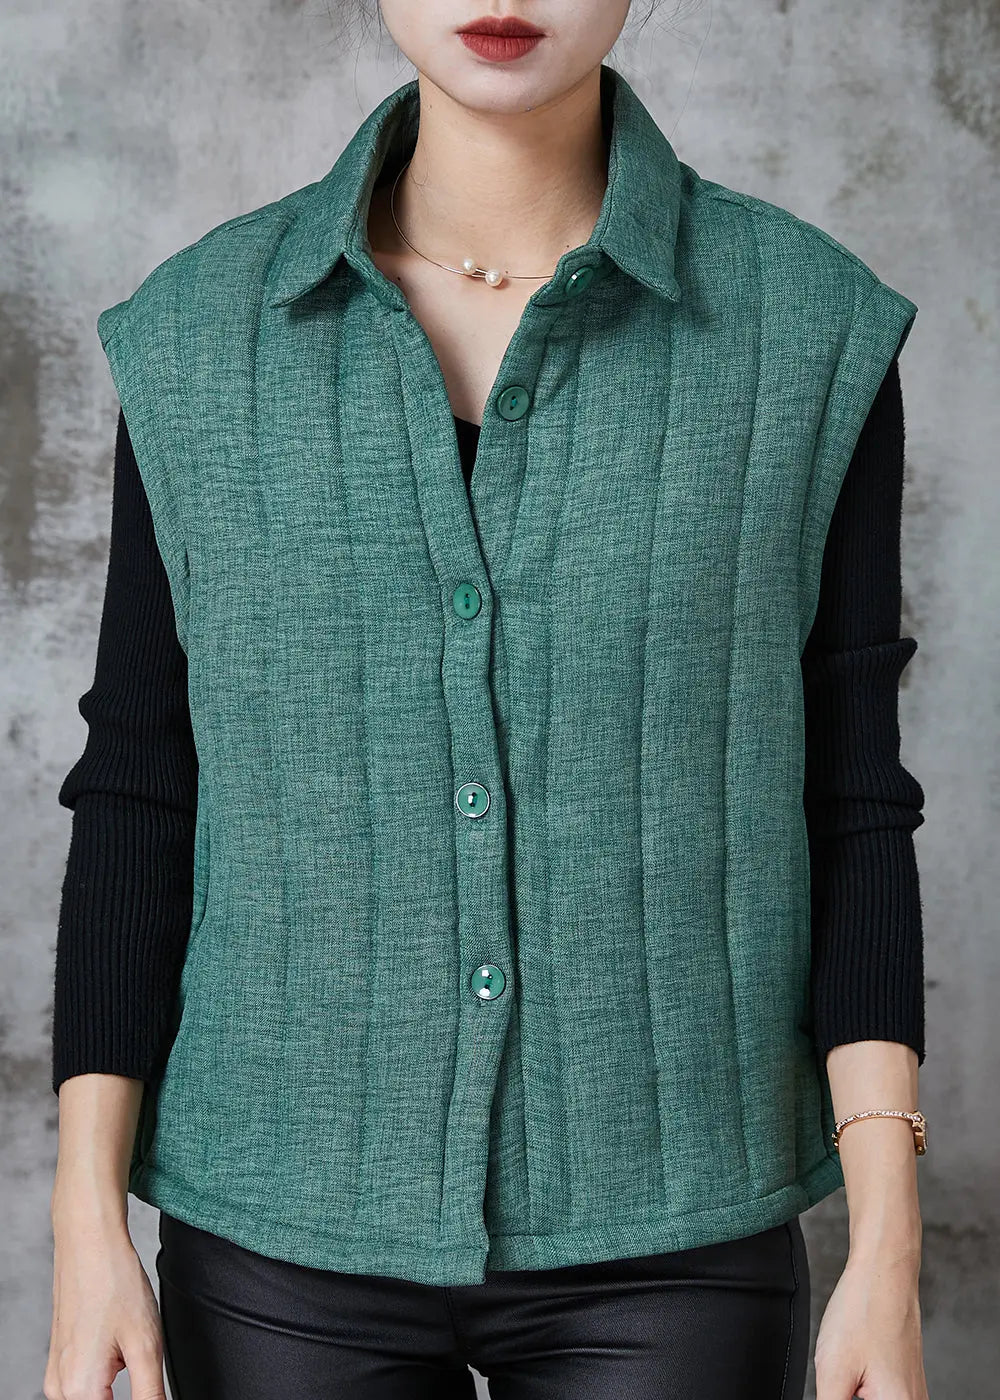 Green Thick Fine Cotton Filled Vest Peter Pan Collar Pockets Spring Ada Fashion